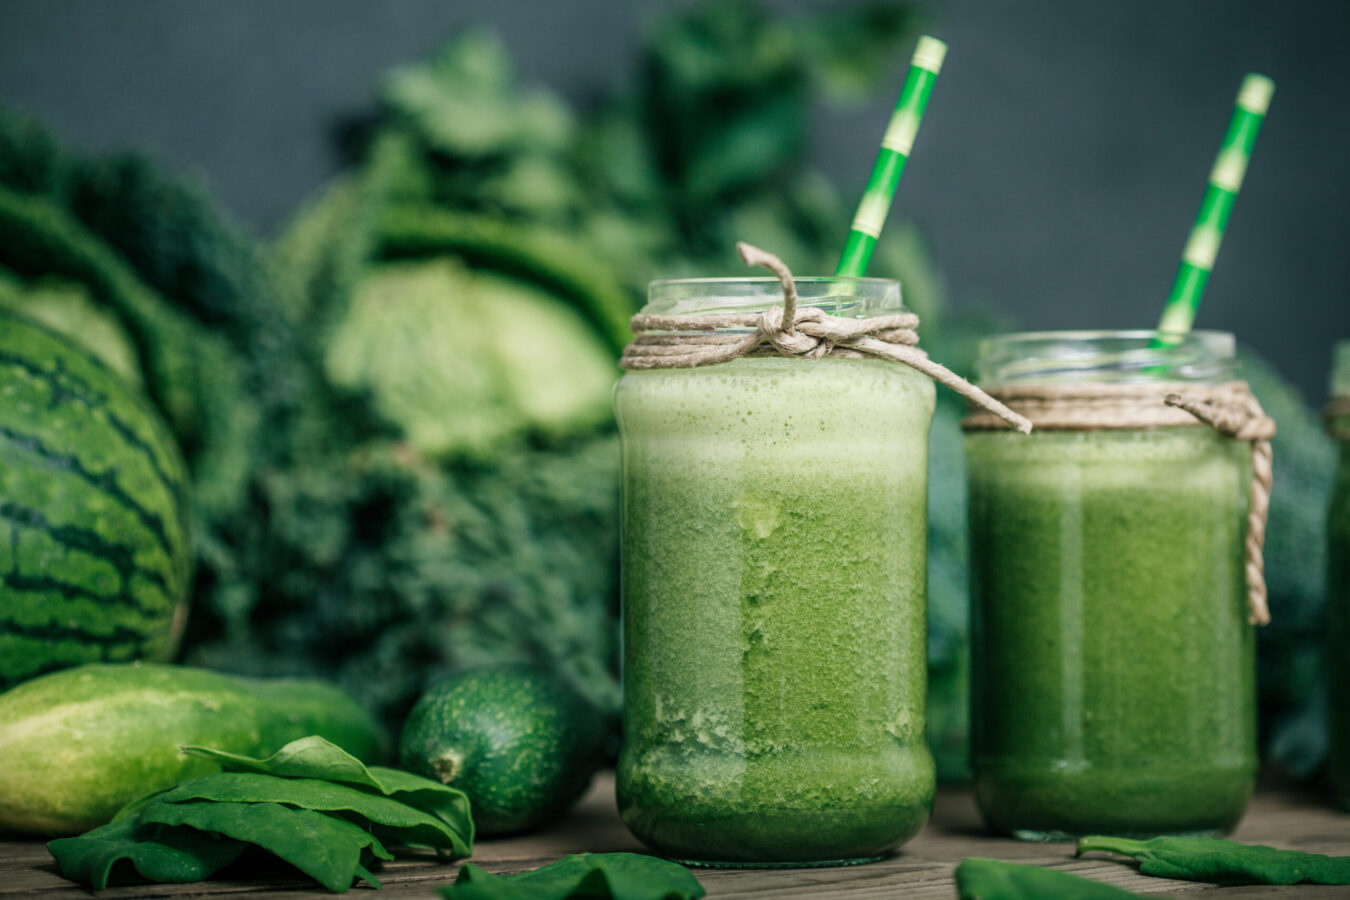 Blended green vegan smoothie on wooden table